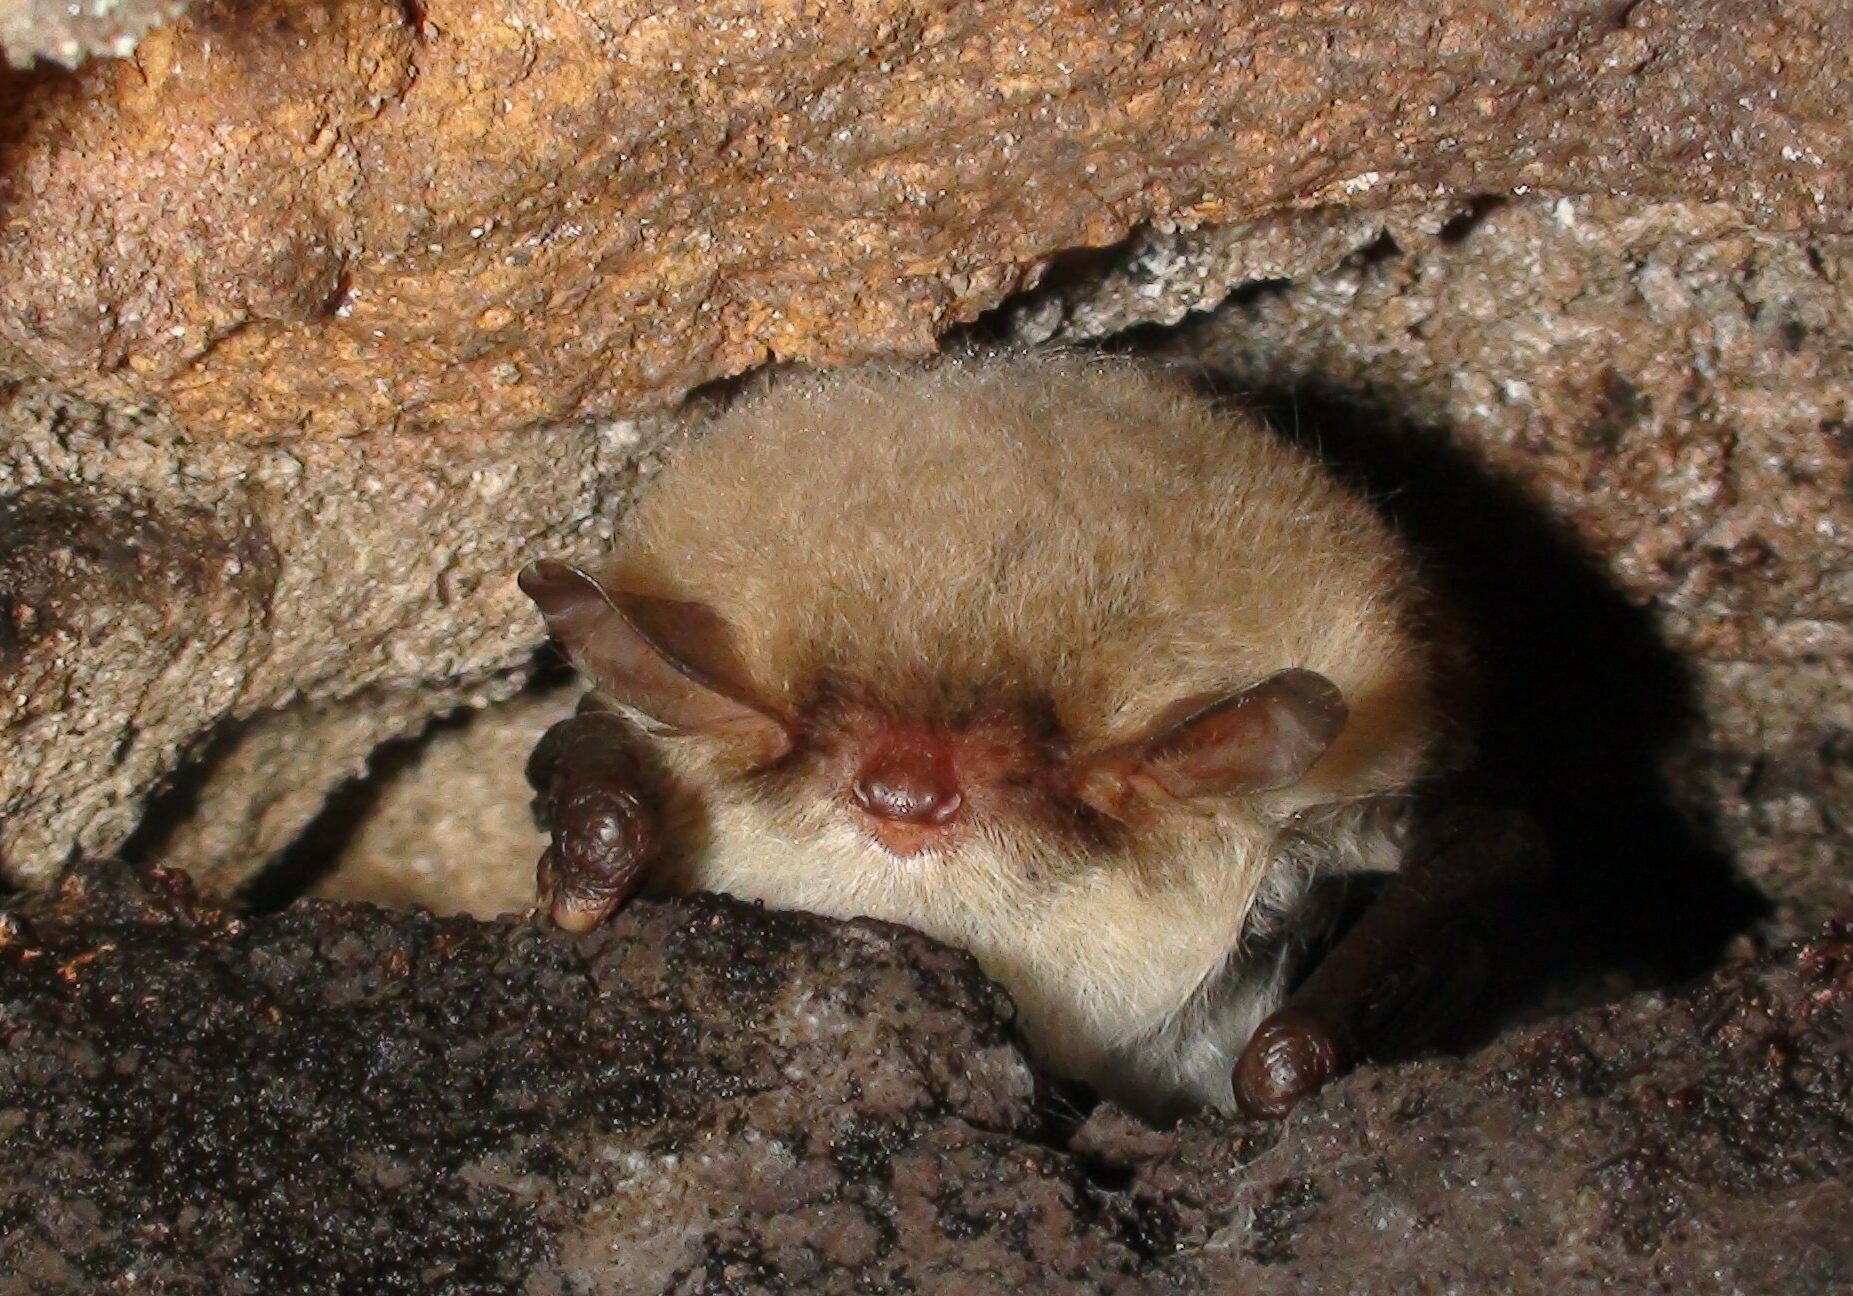 The face of a Natterer's Bat, the bat is squeezed into a small gap in some stonework